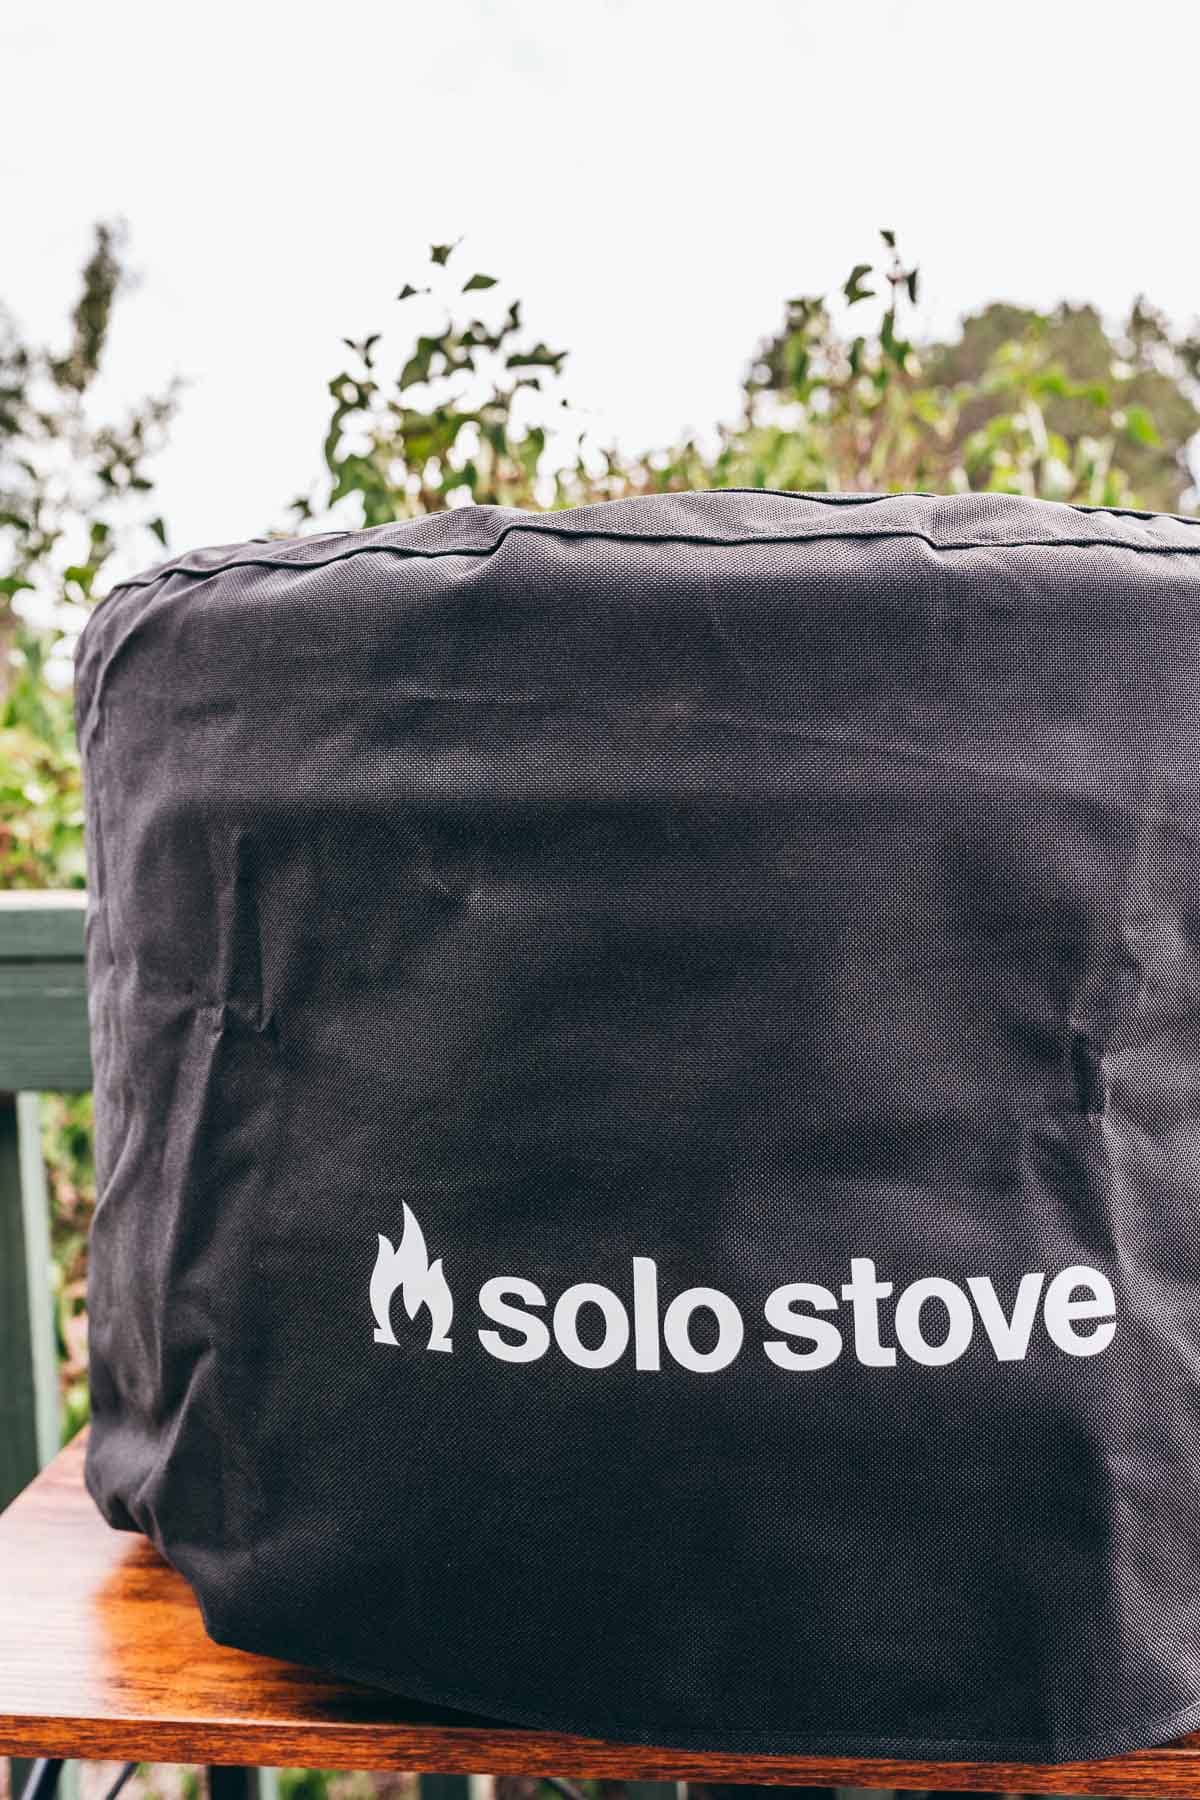 A black bag with white text featuring a solo stove pizza oven.